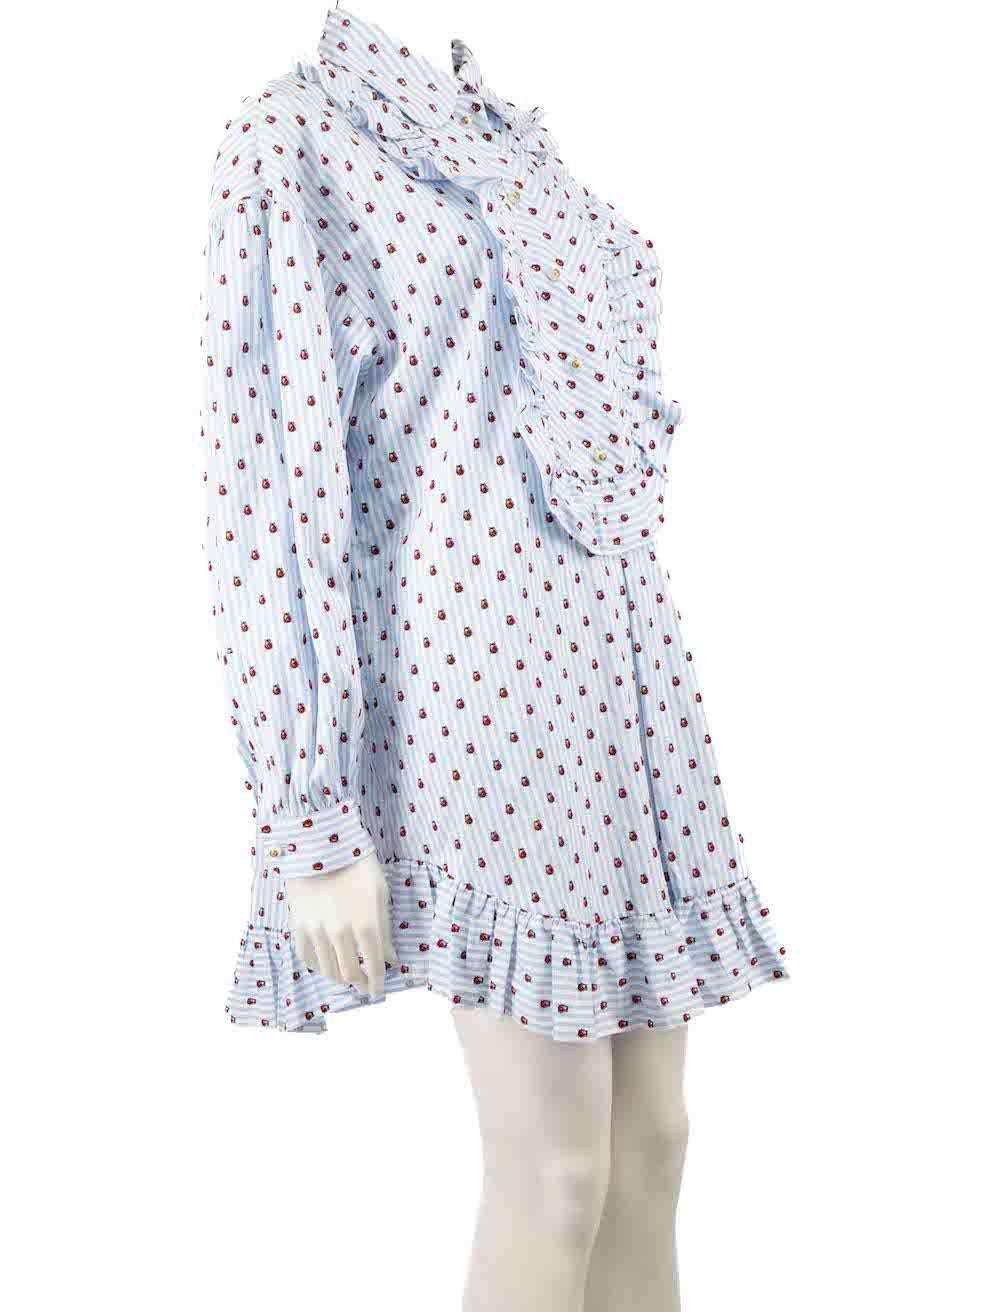 CONDITION is Very good. Minimal wear to blouse is evident. Minimal wear to the rear collar lining with small mark on this used Gucci designer resale item.
 
 
 
 Details
 
 
 Blue
 
 Cotton
 
 Mini dress
 
 Striped ladybird print pattern
 
 Front